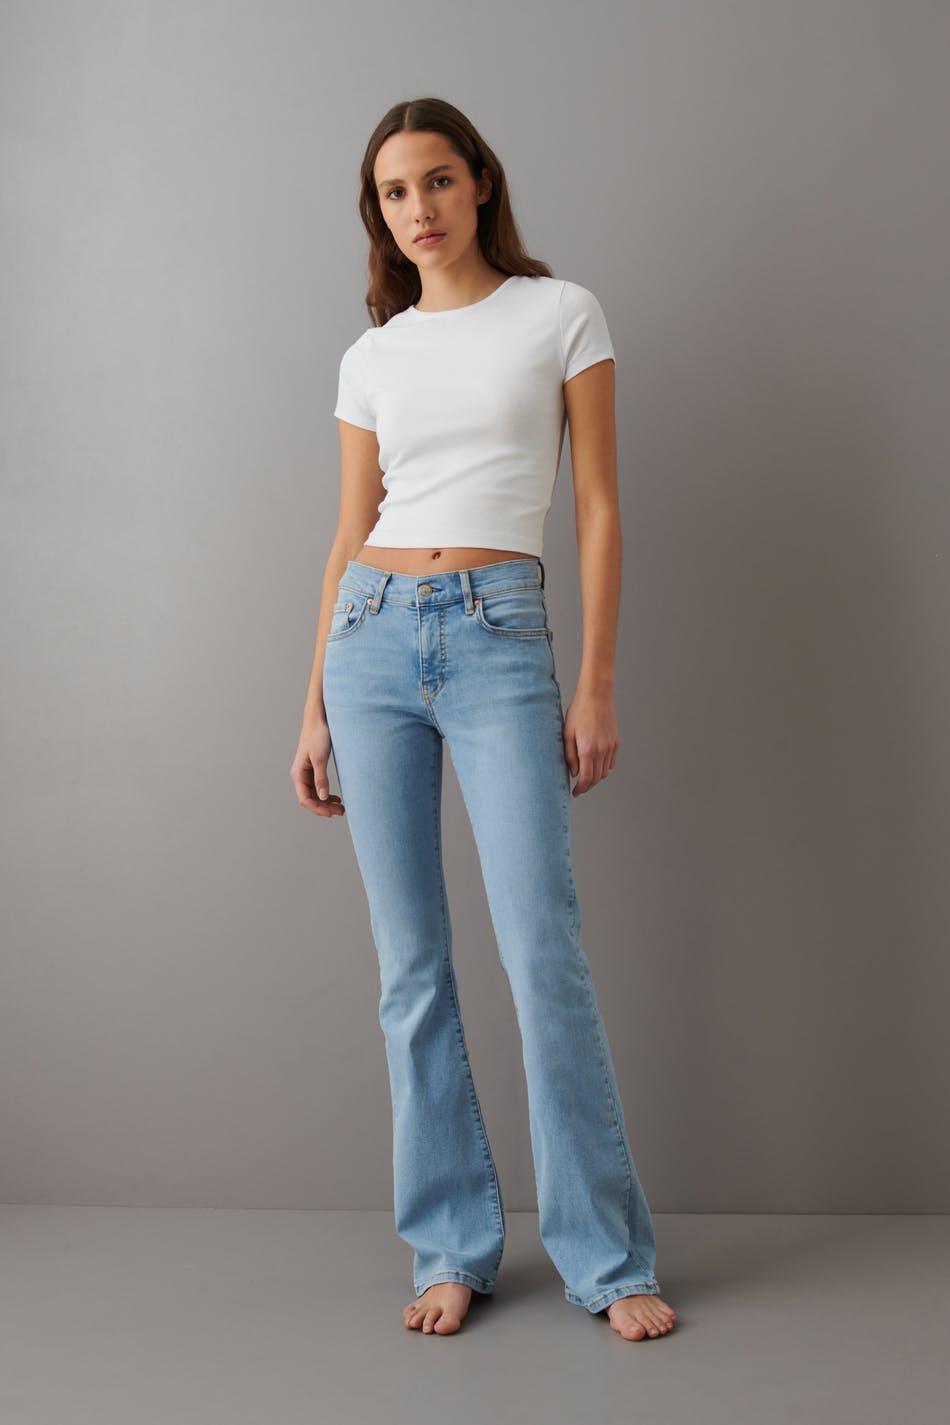 Gina Tricot - Low waist bootcut jeans - low waist jeans- Blue - 34 - Female